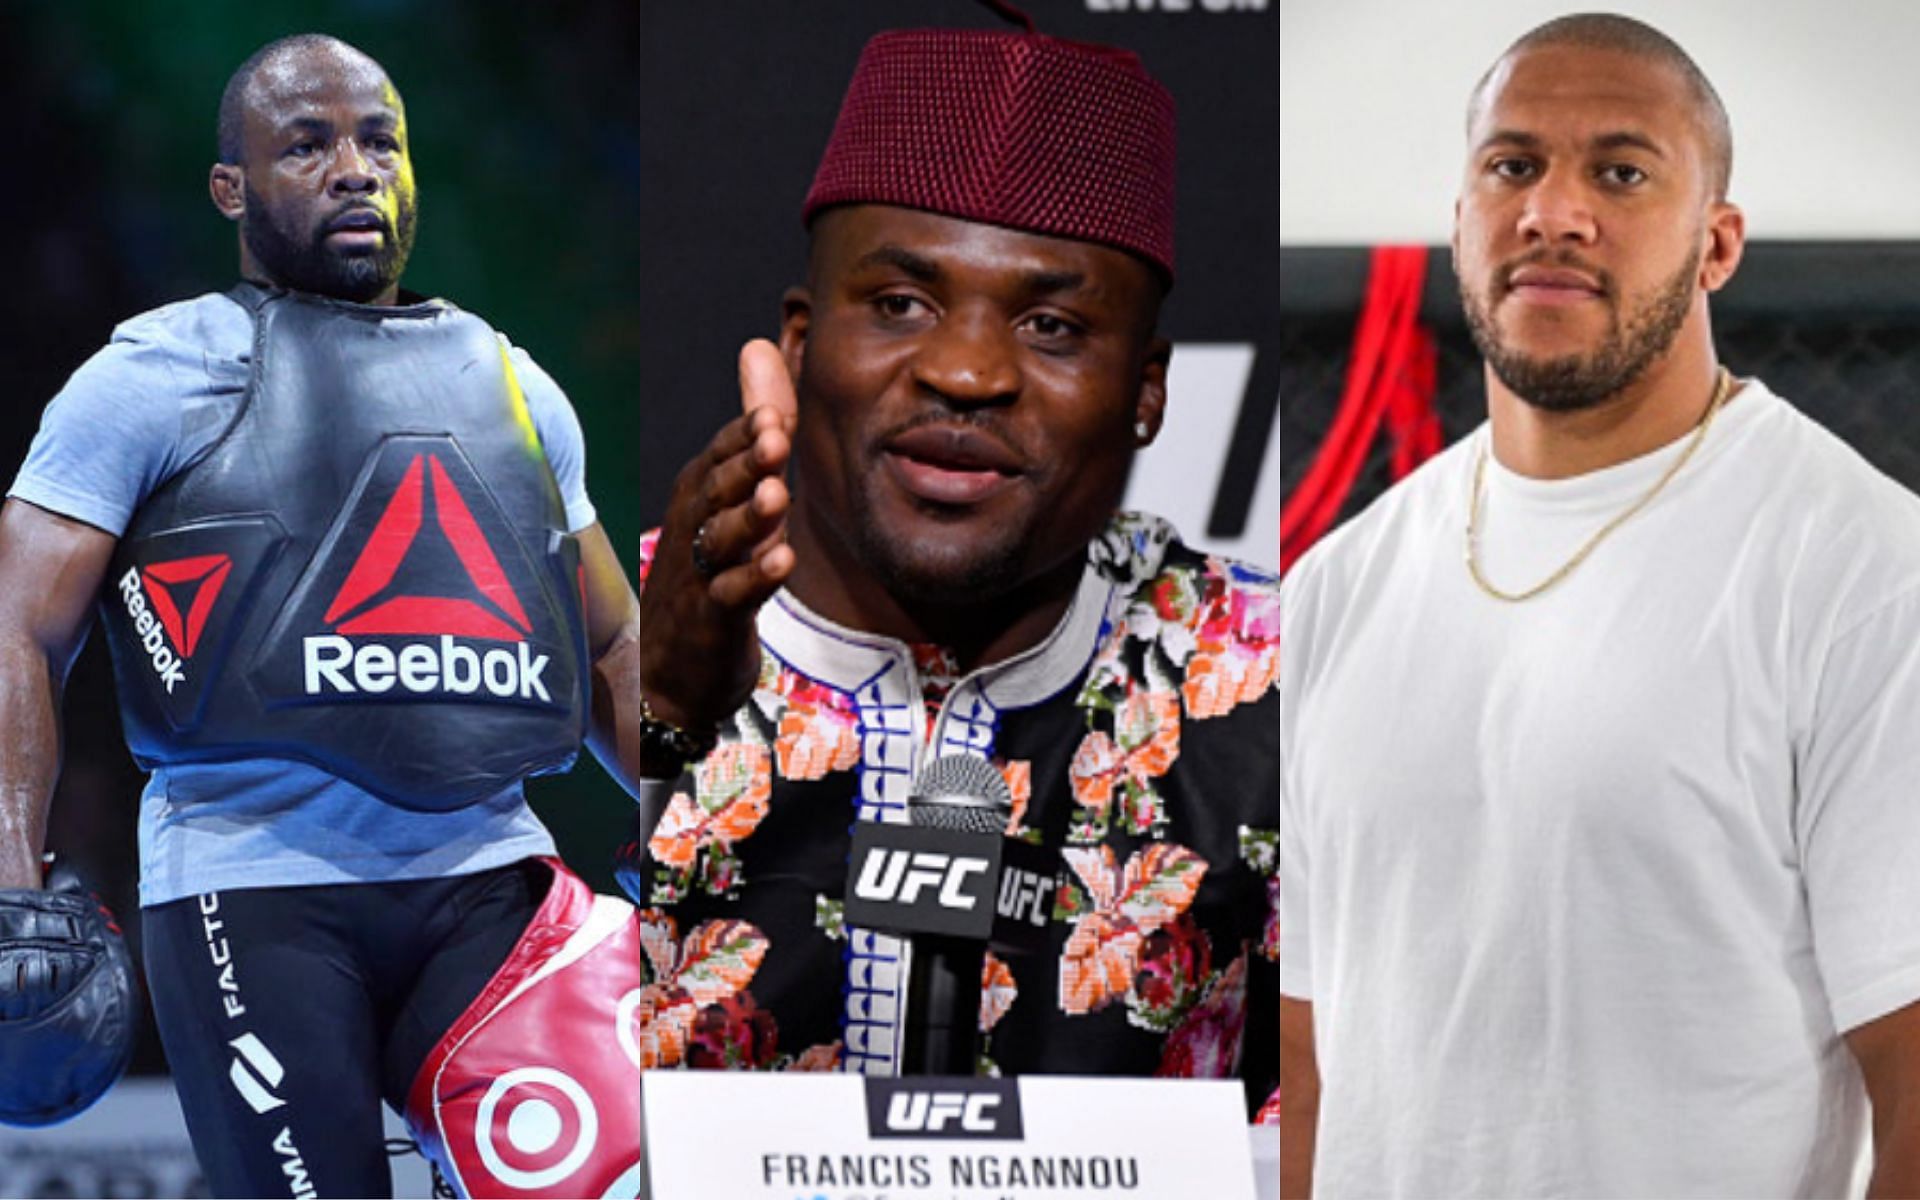 Francis Ngannou shared his thoughts on the strategy his former coach Fernand Lopez will have Ciryl Gane employ at UFC 270